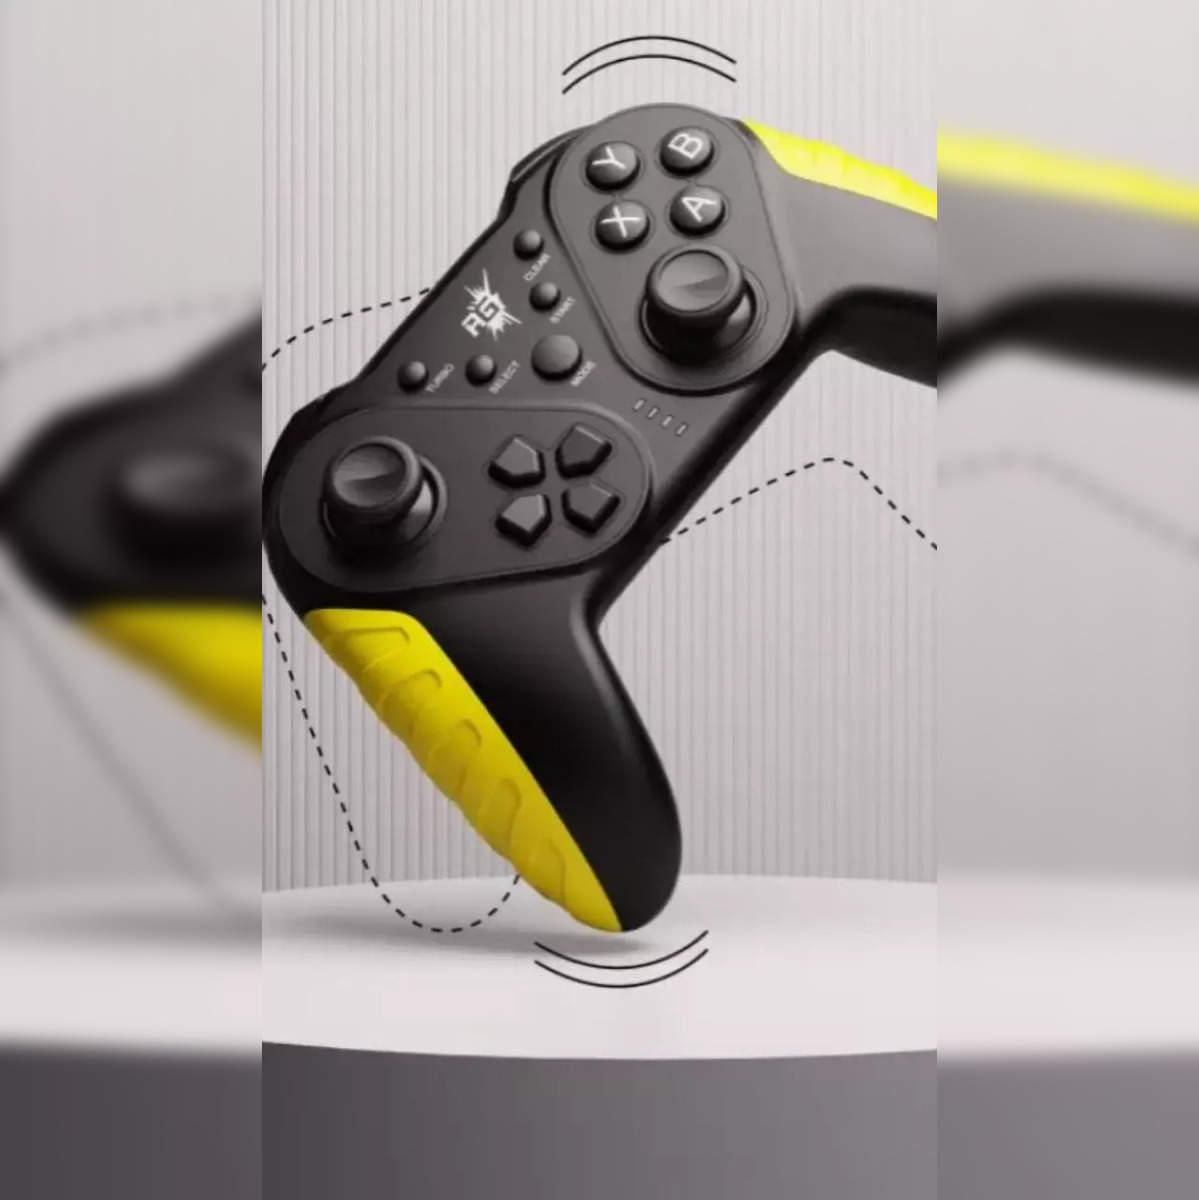 nintendo switch pro controller: Here's full guide to connect